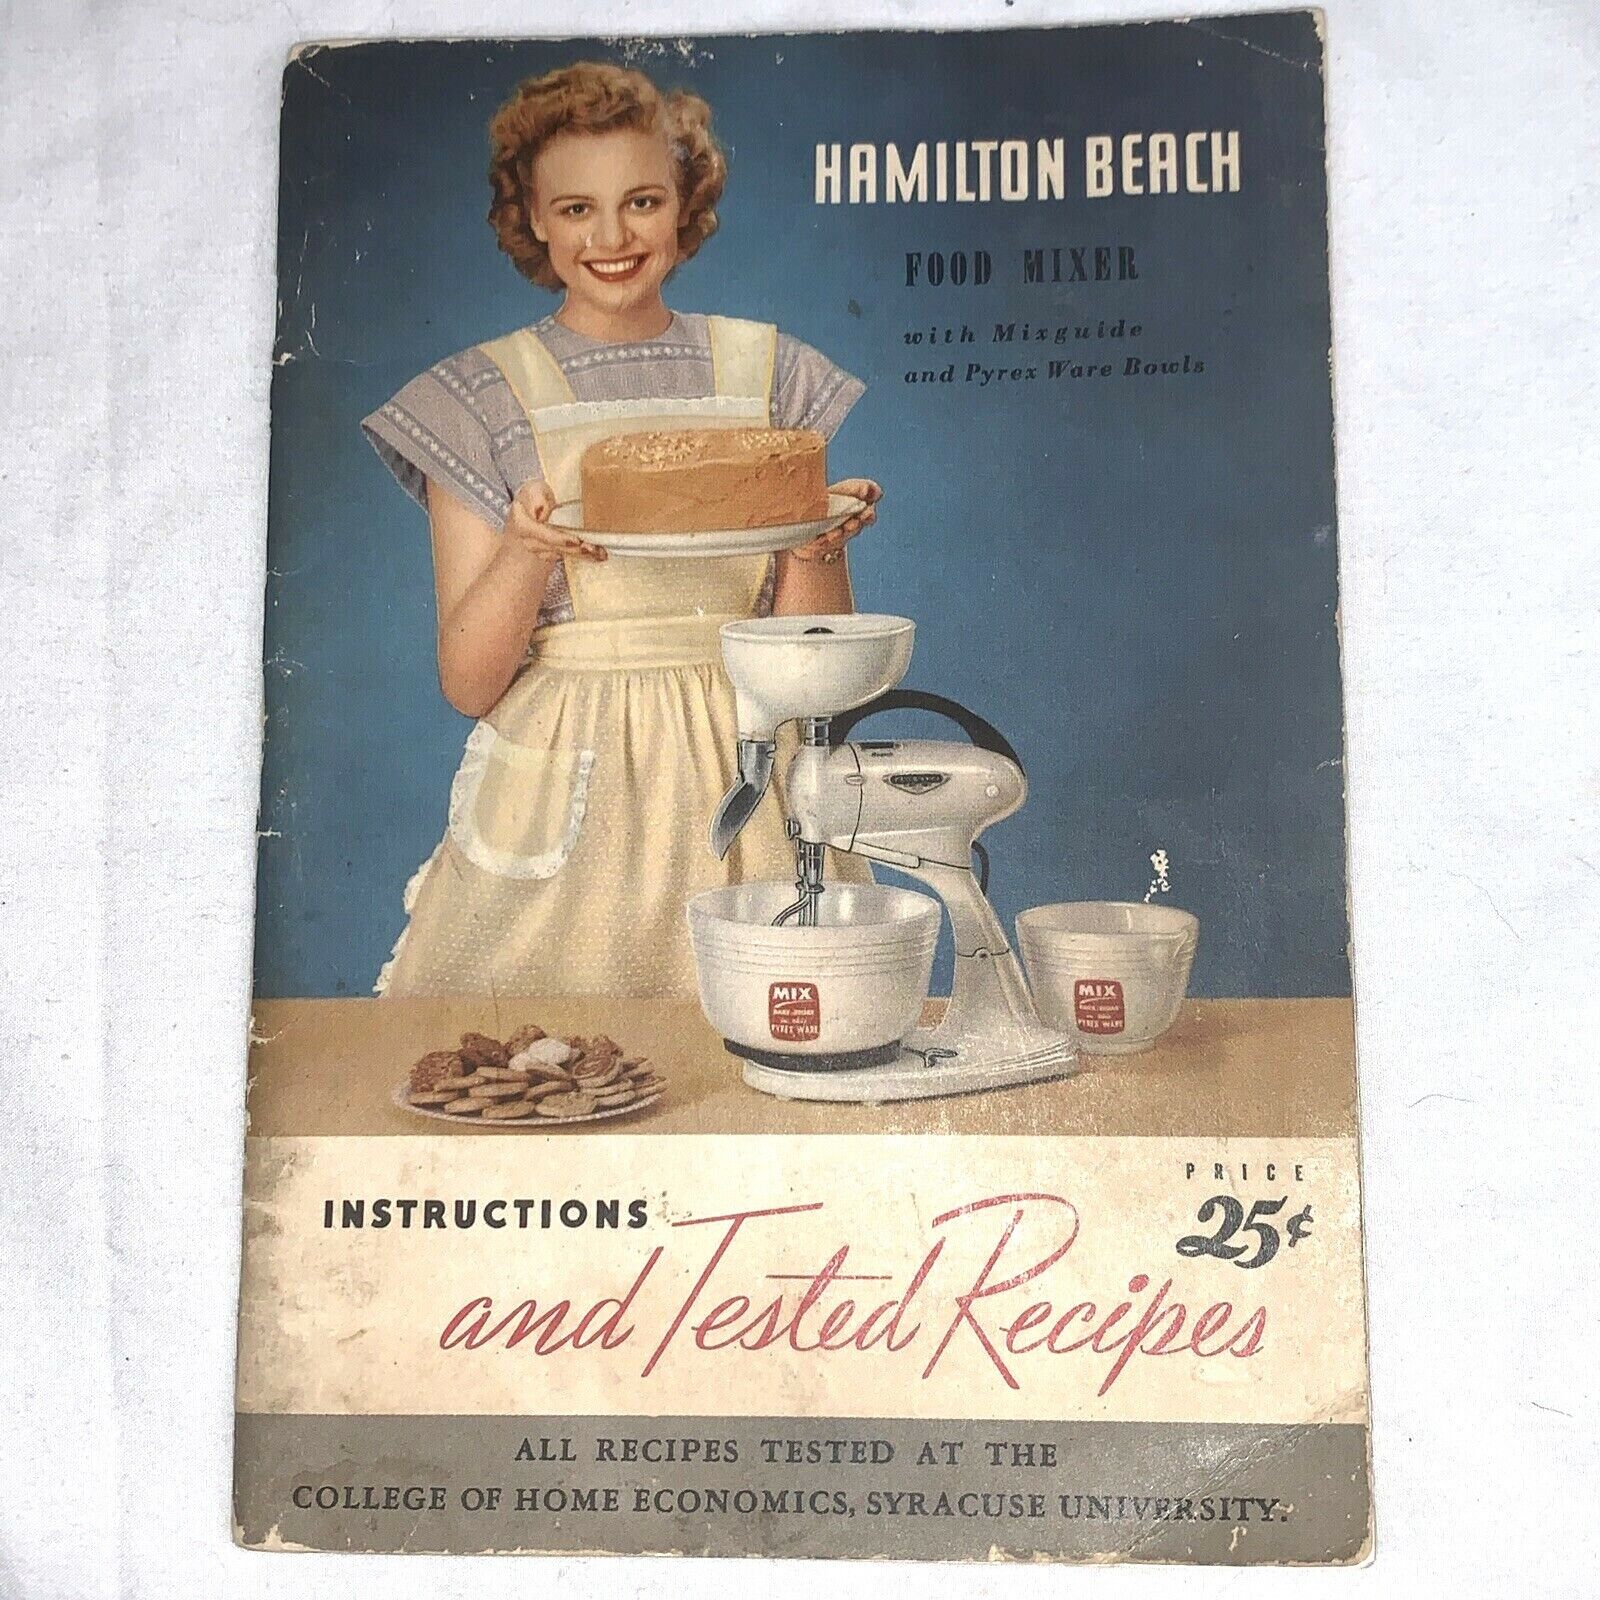 Hamilton Beach  Vintage Cookbook Food Mixer Instructions and Tested Recipes 1948